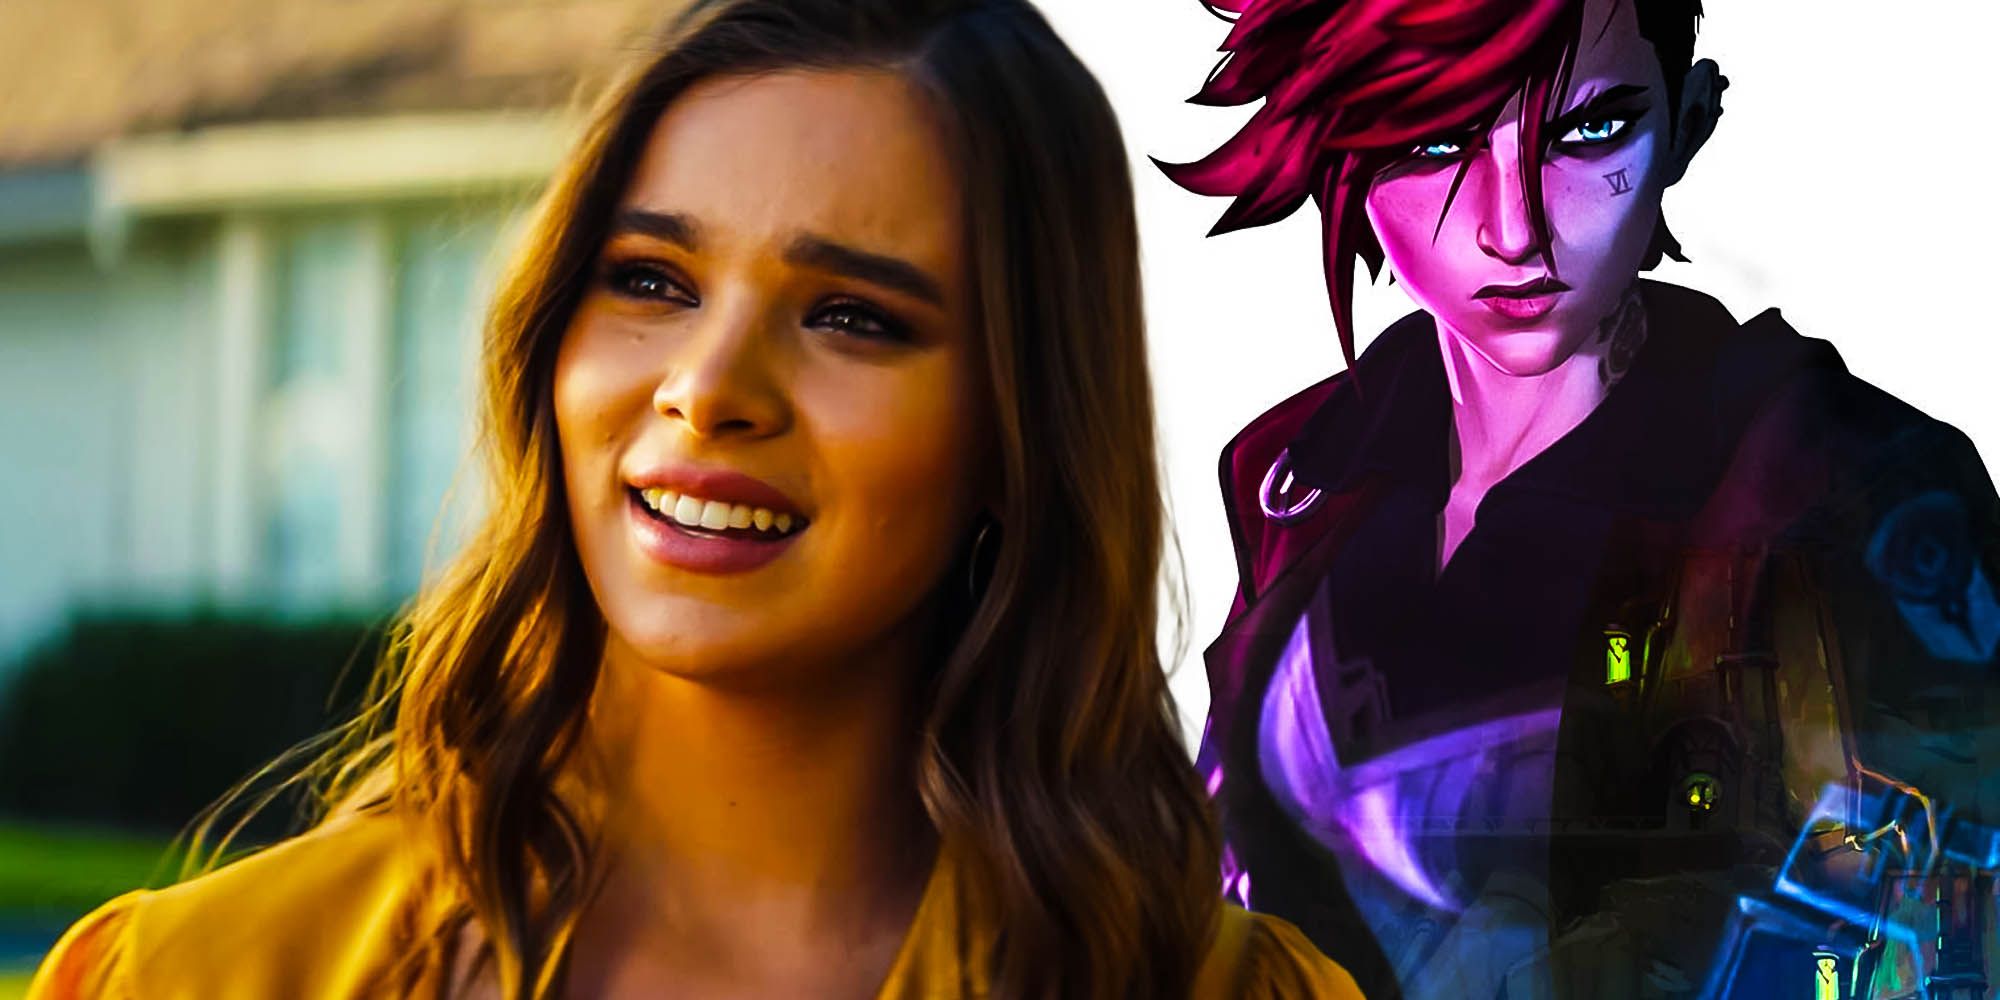 Blended image showing Hailee Steinfeld and Vi from Arcane